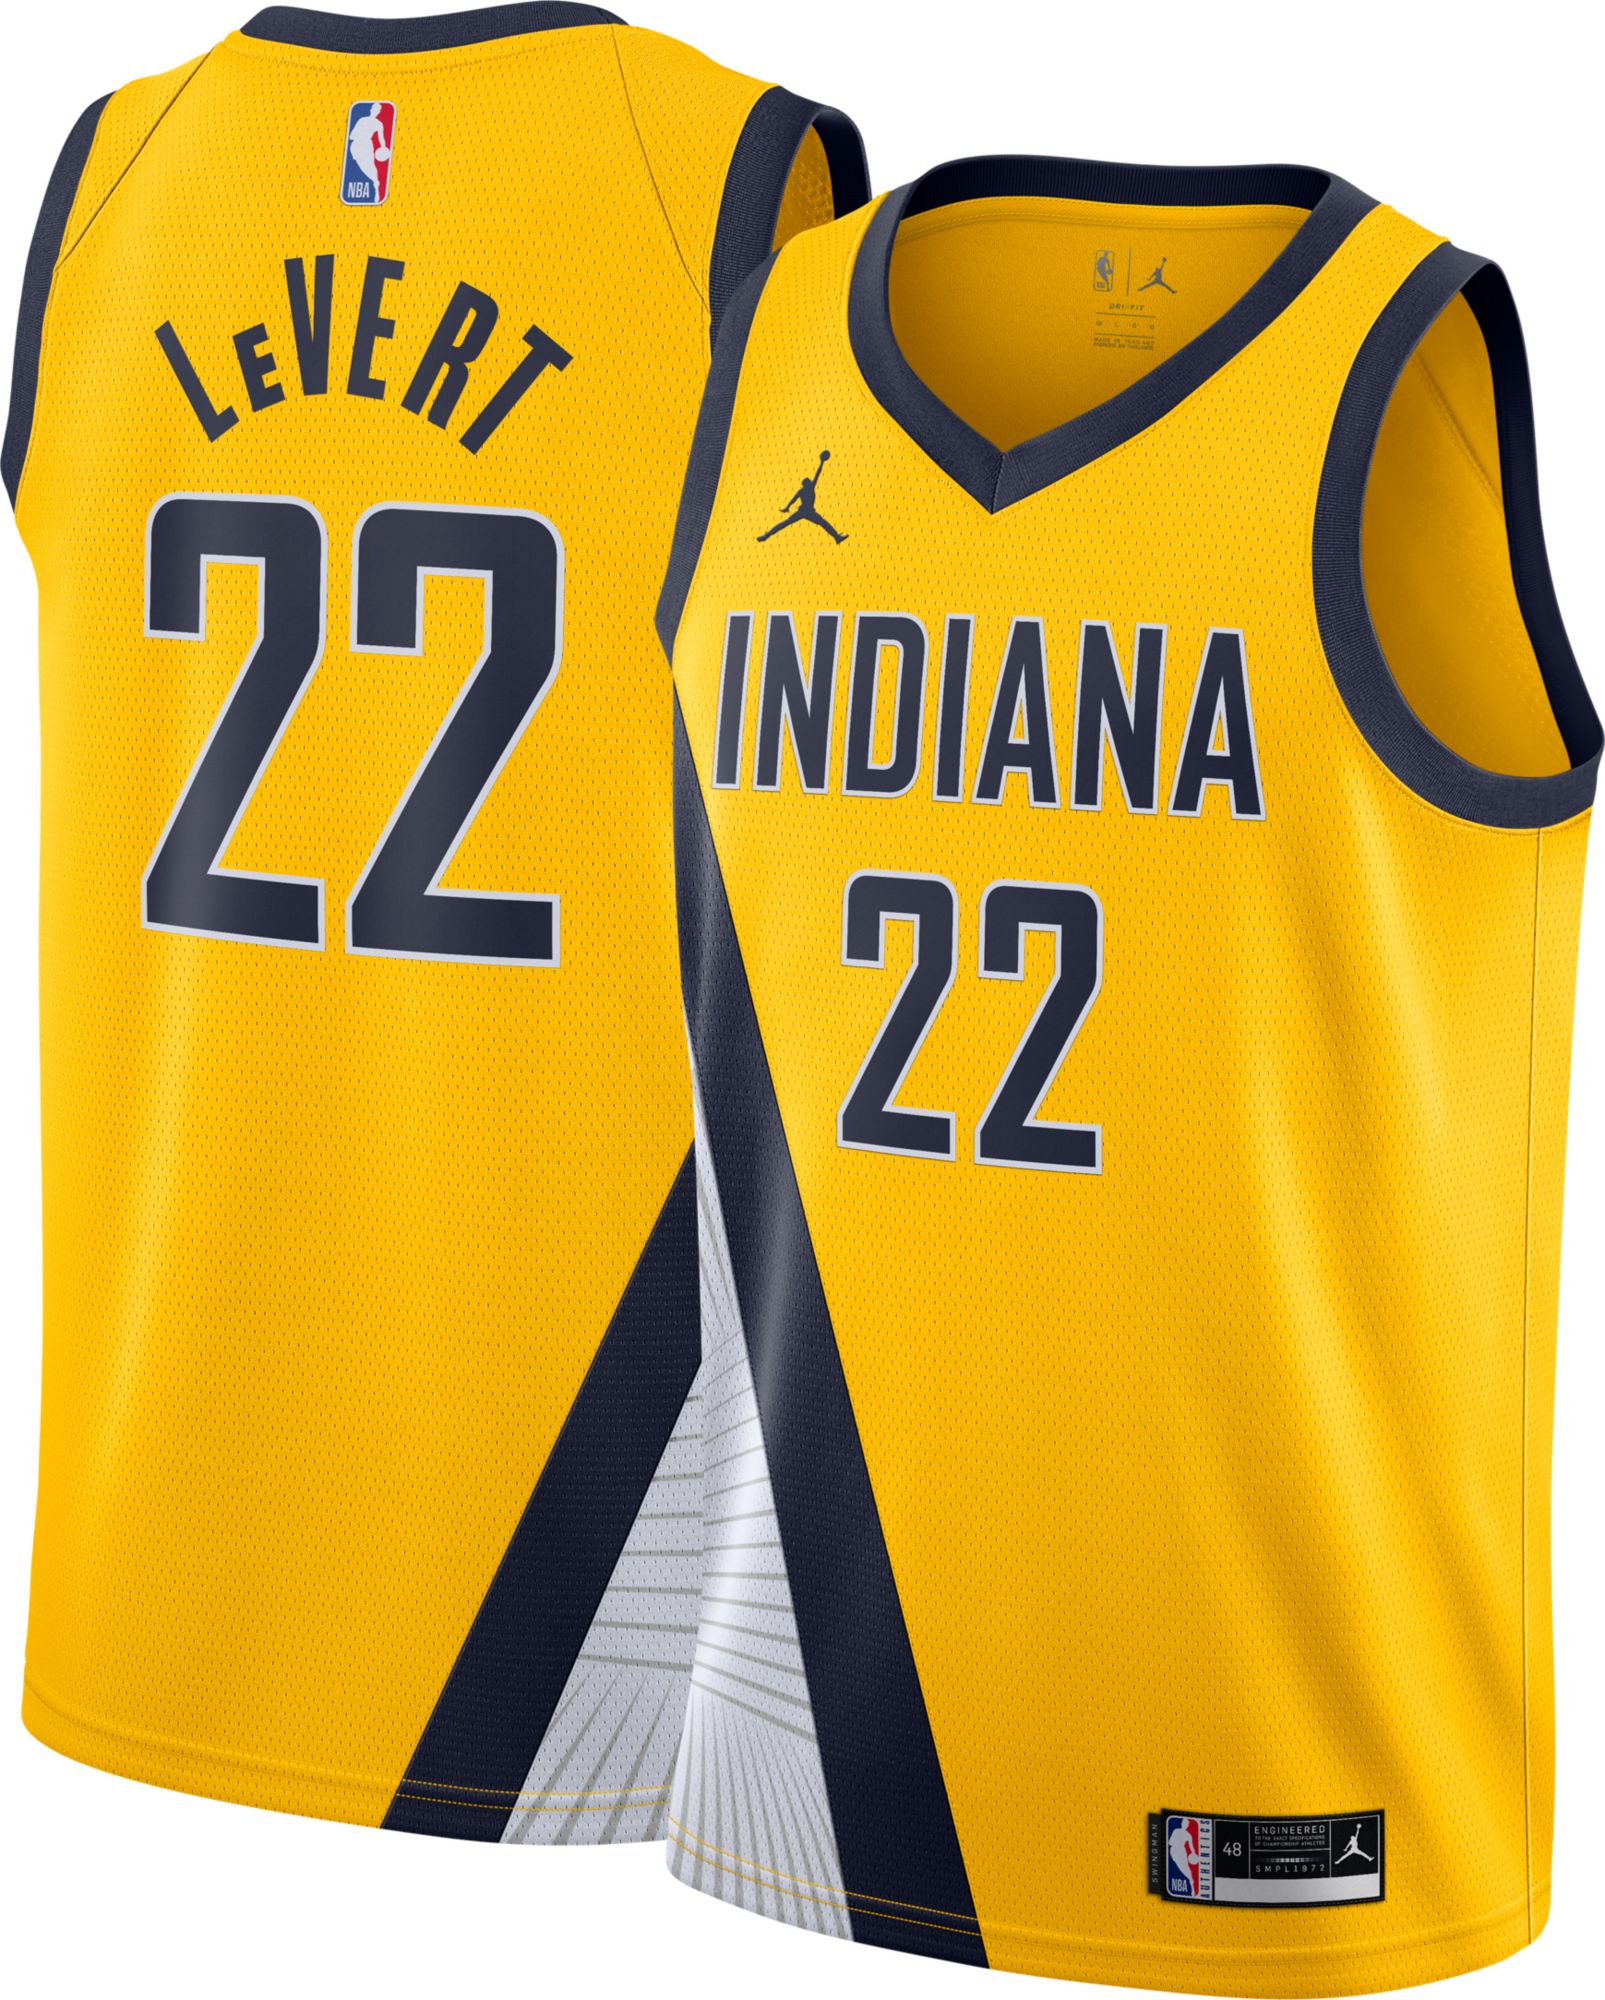 pacer jersey